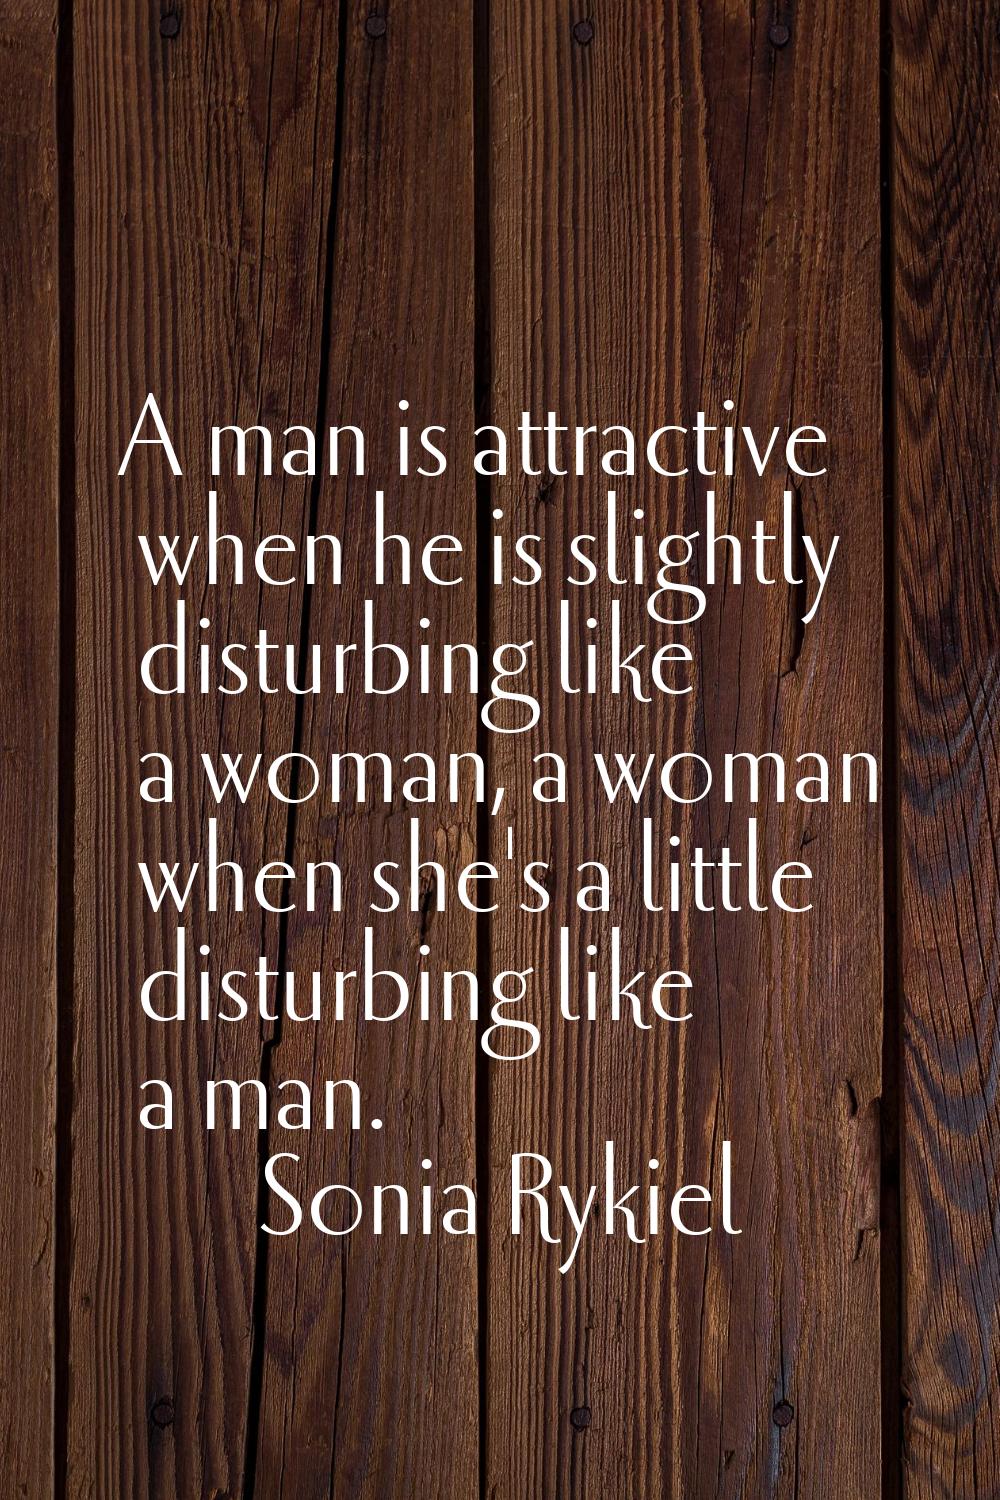 A man is attractive when he is slightly disturbing like a woman, a woman when she's a little distur